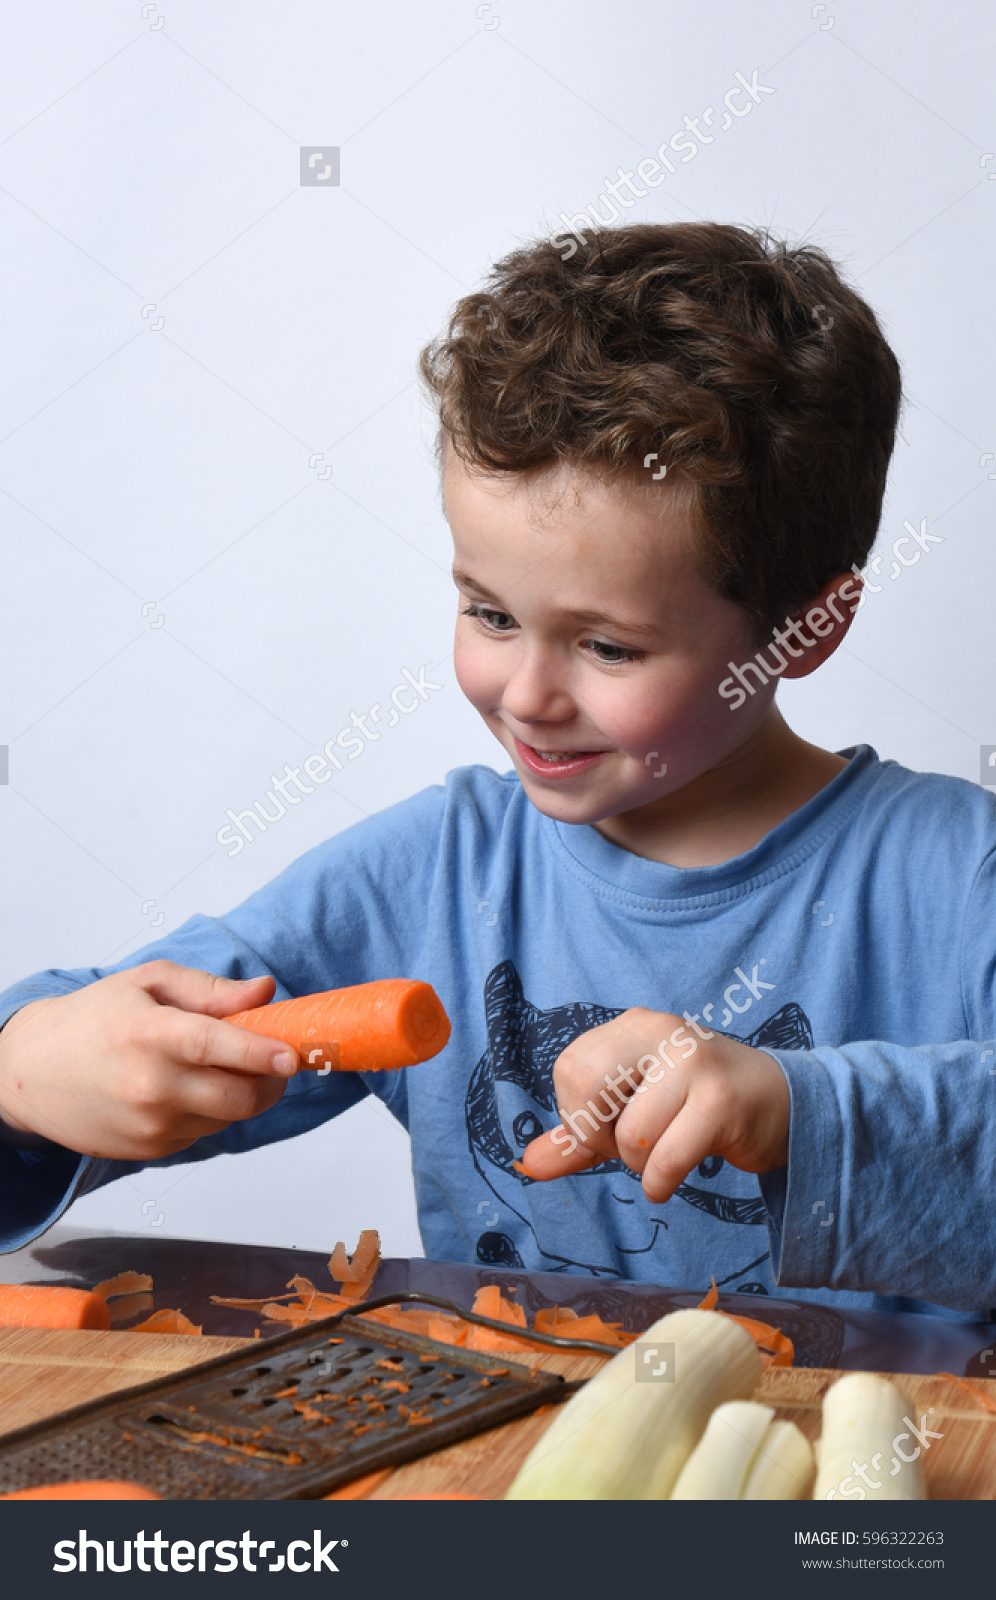 stock-photo-child-cooking-596322263